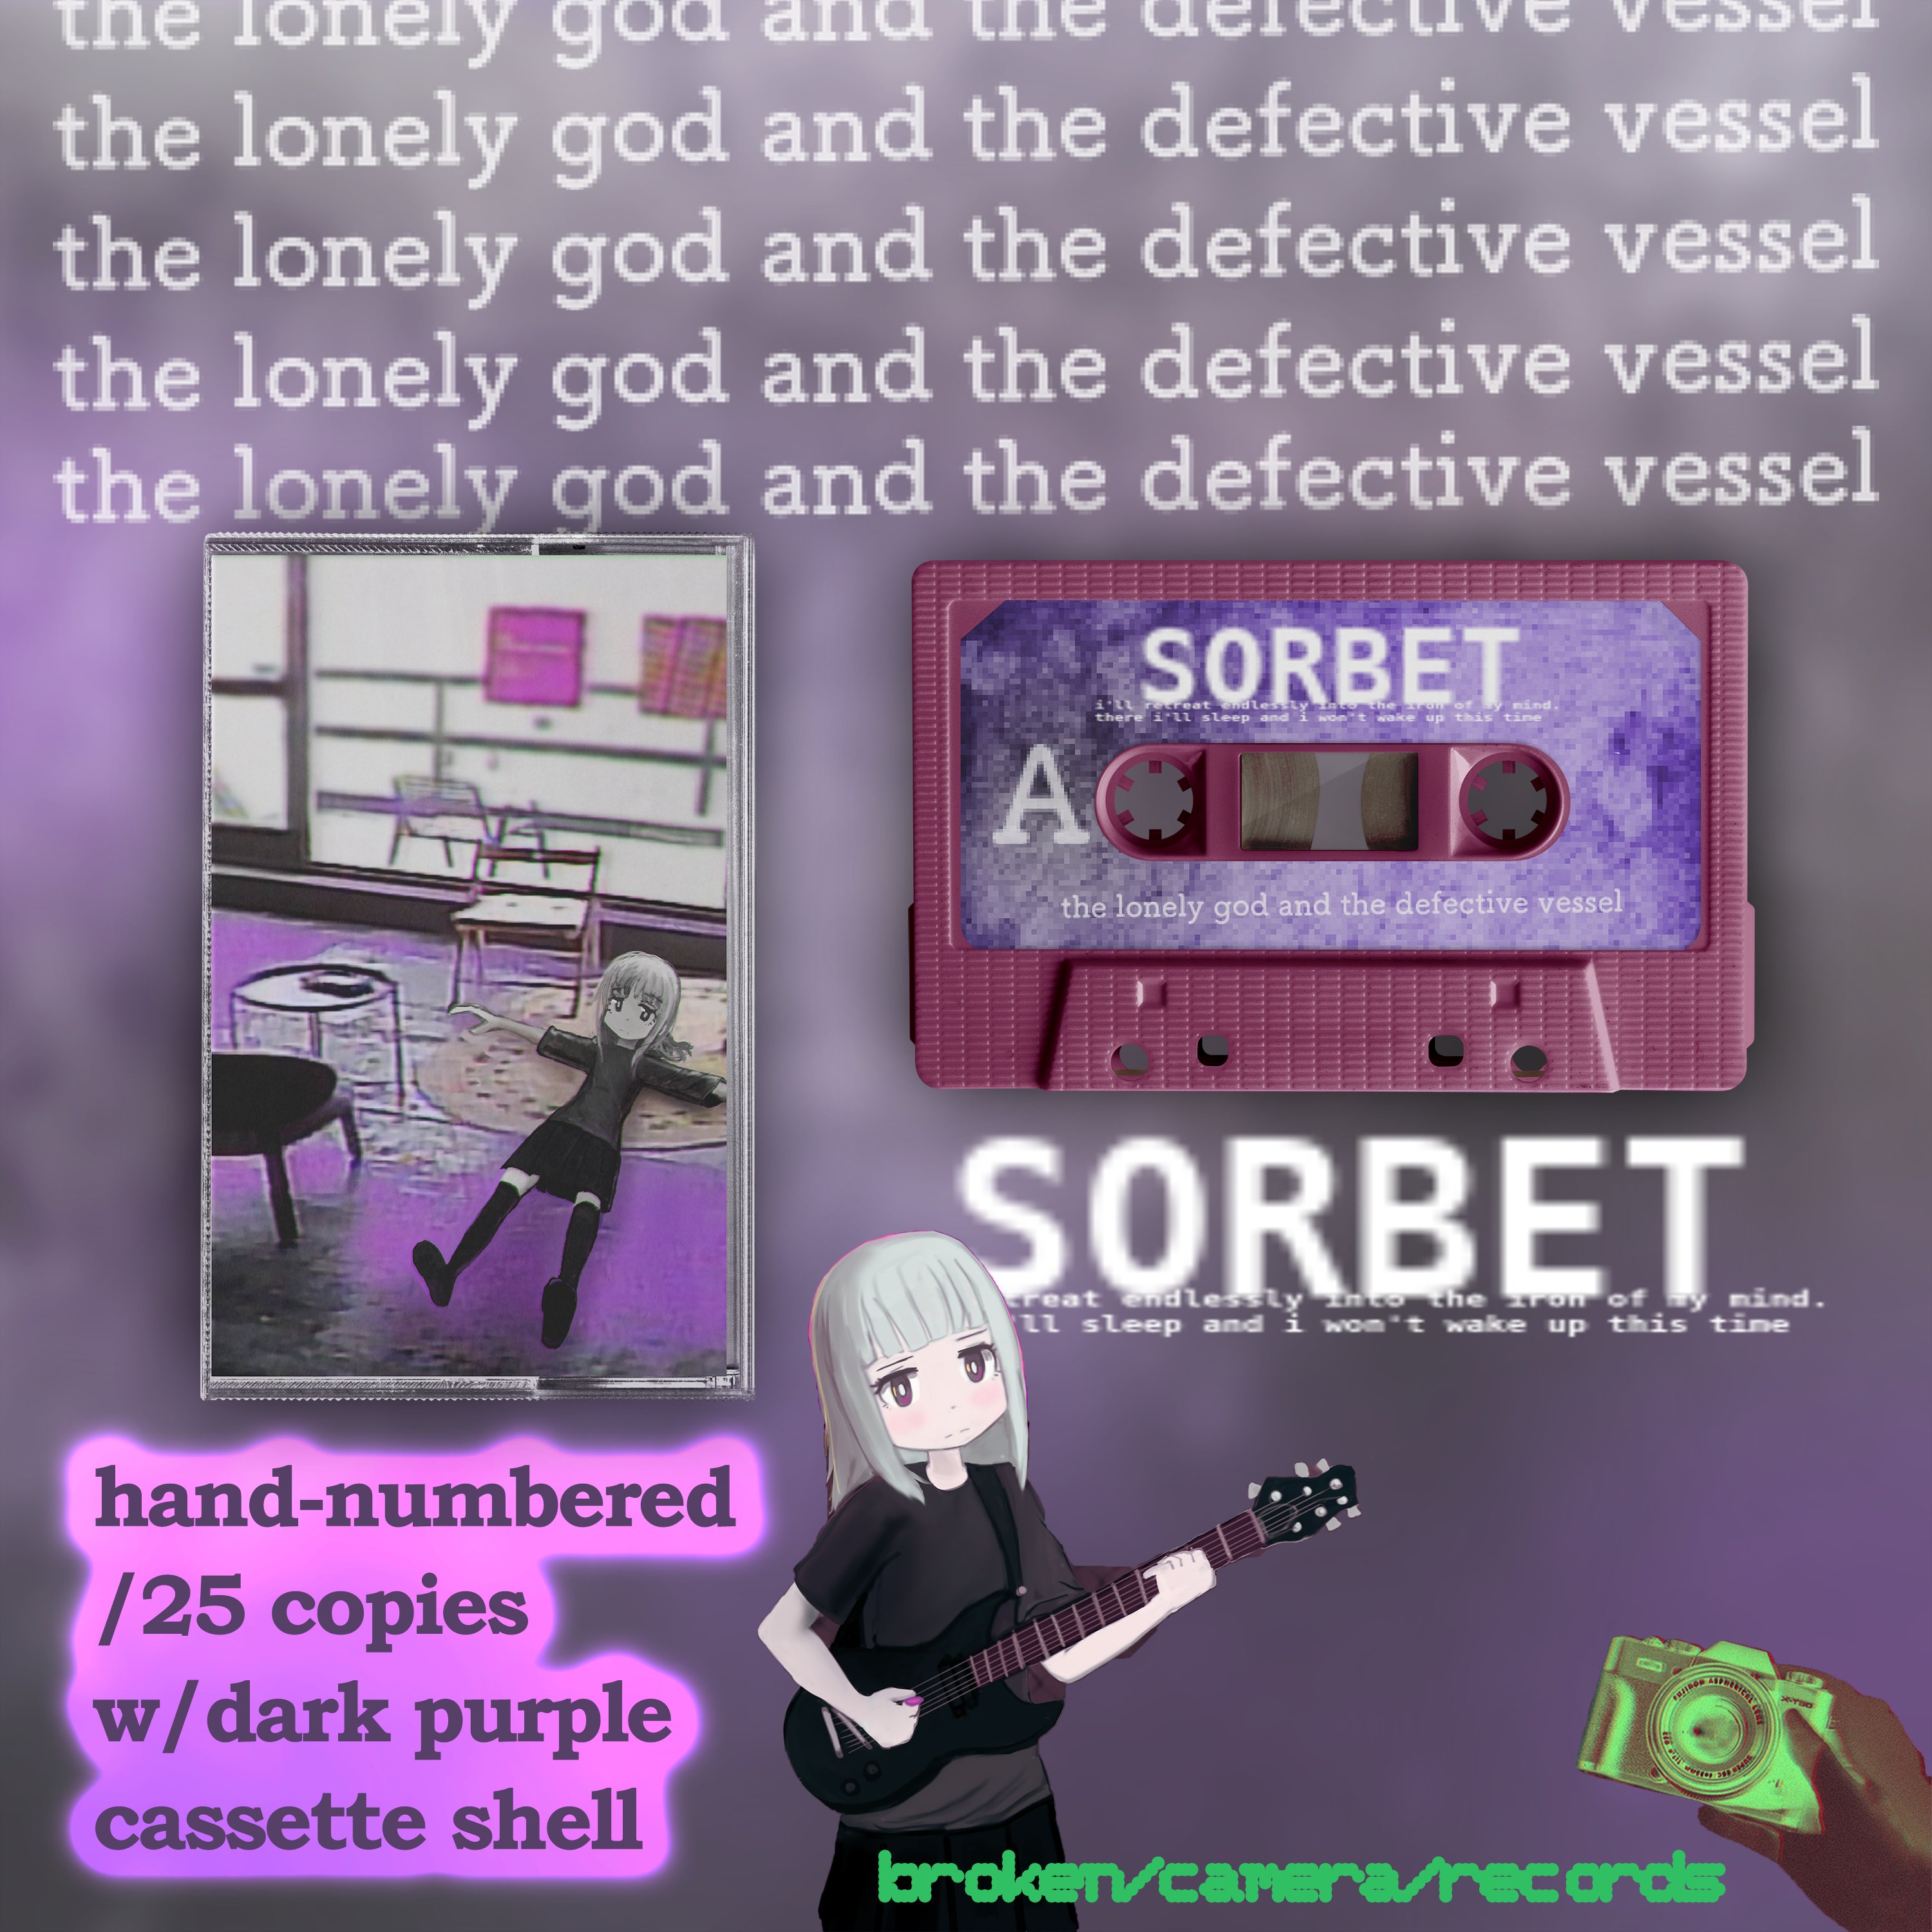 SORBET tapes now on sale